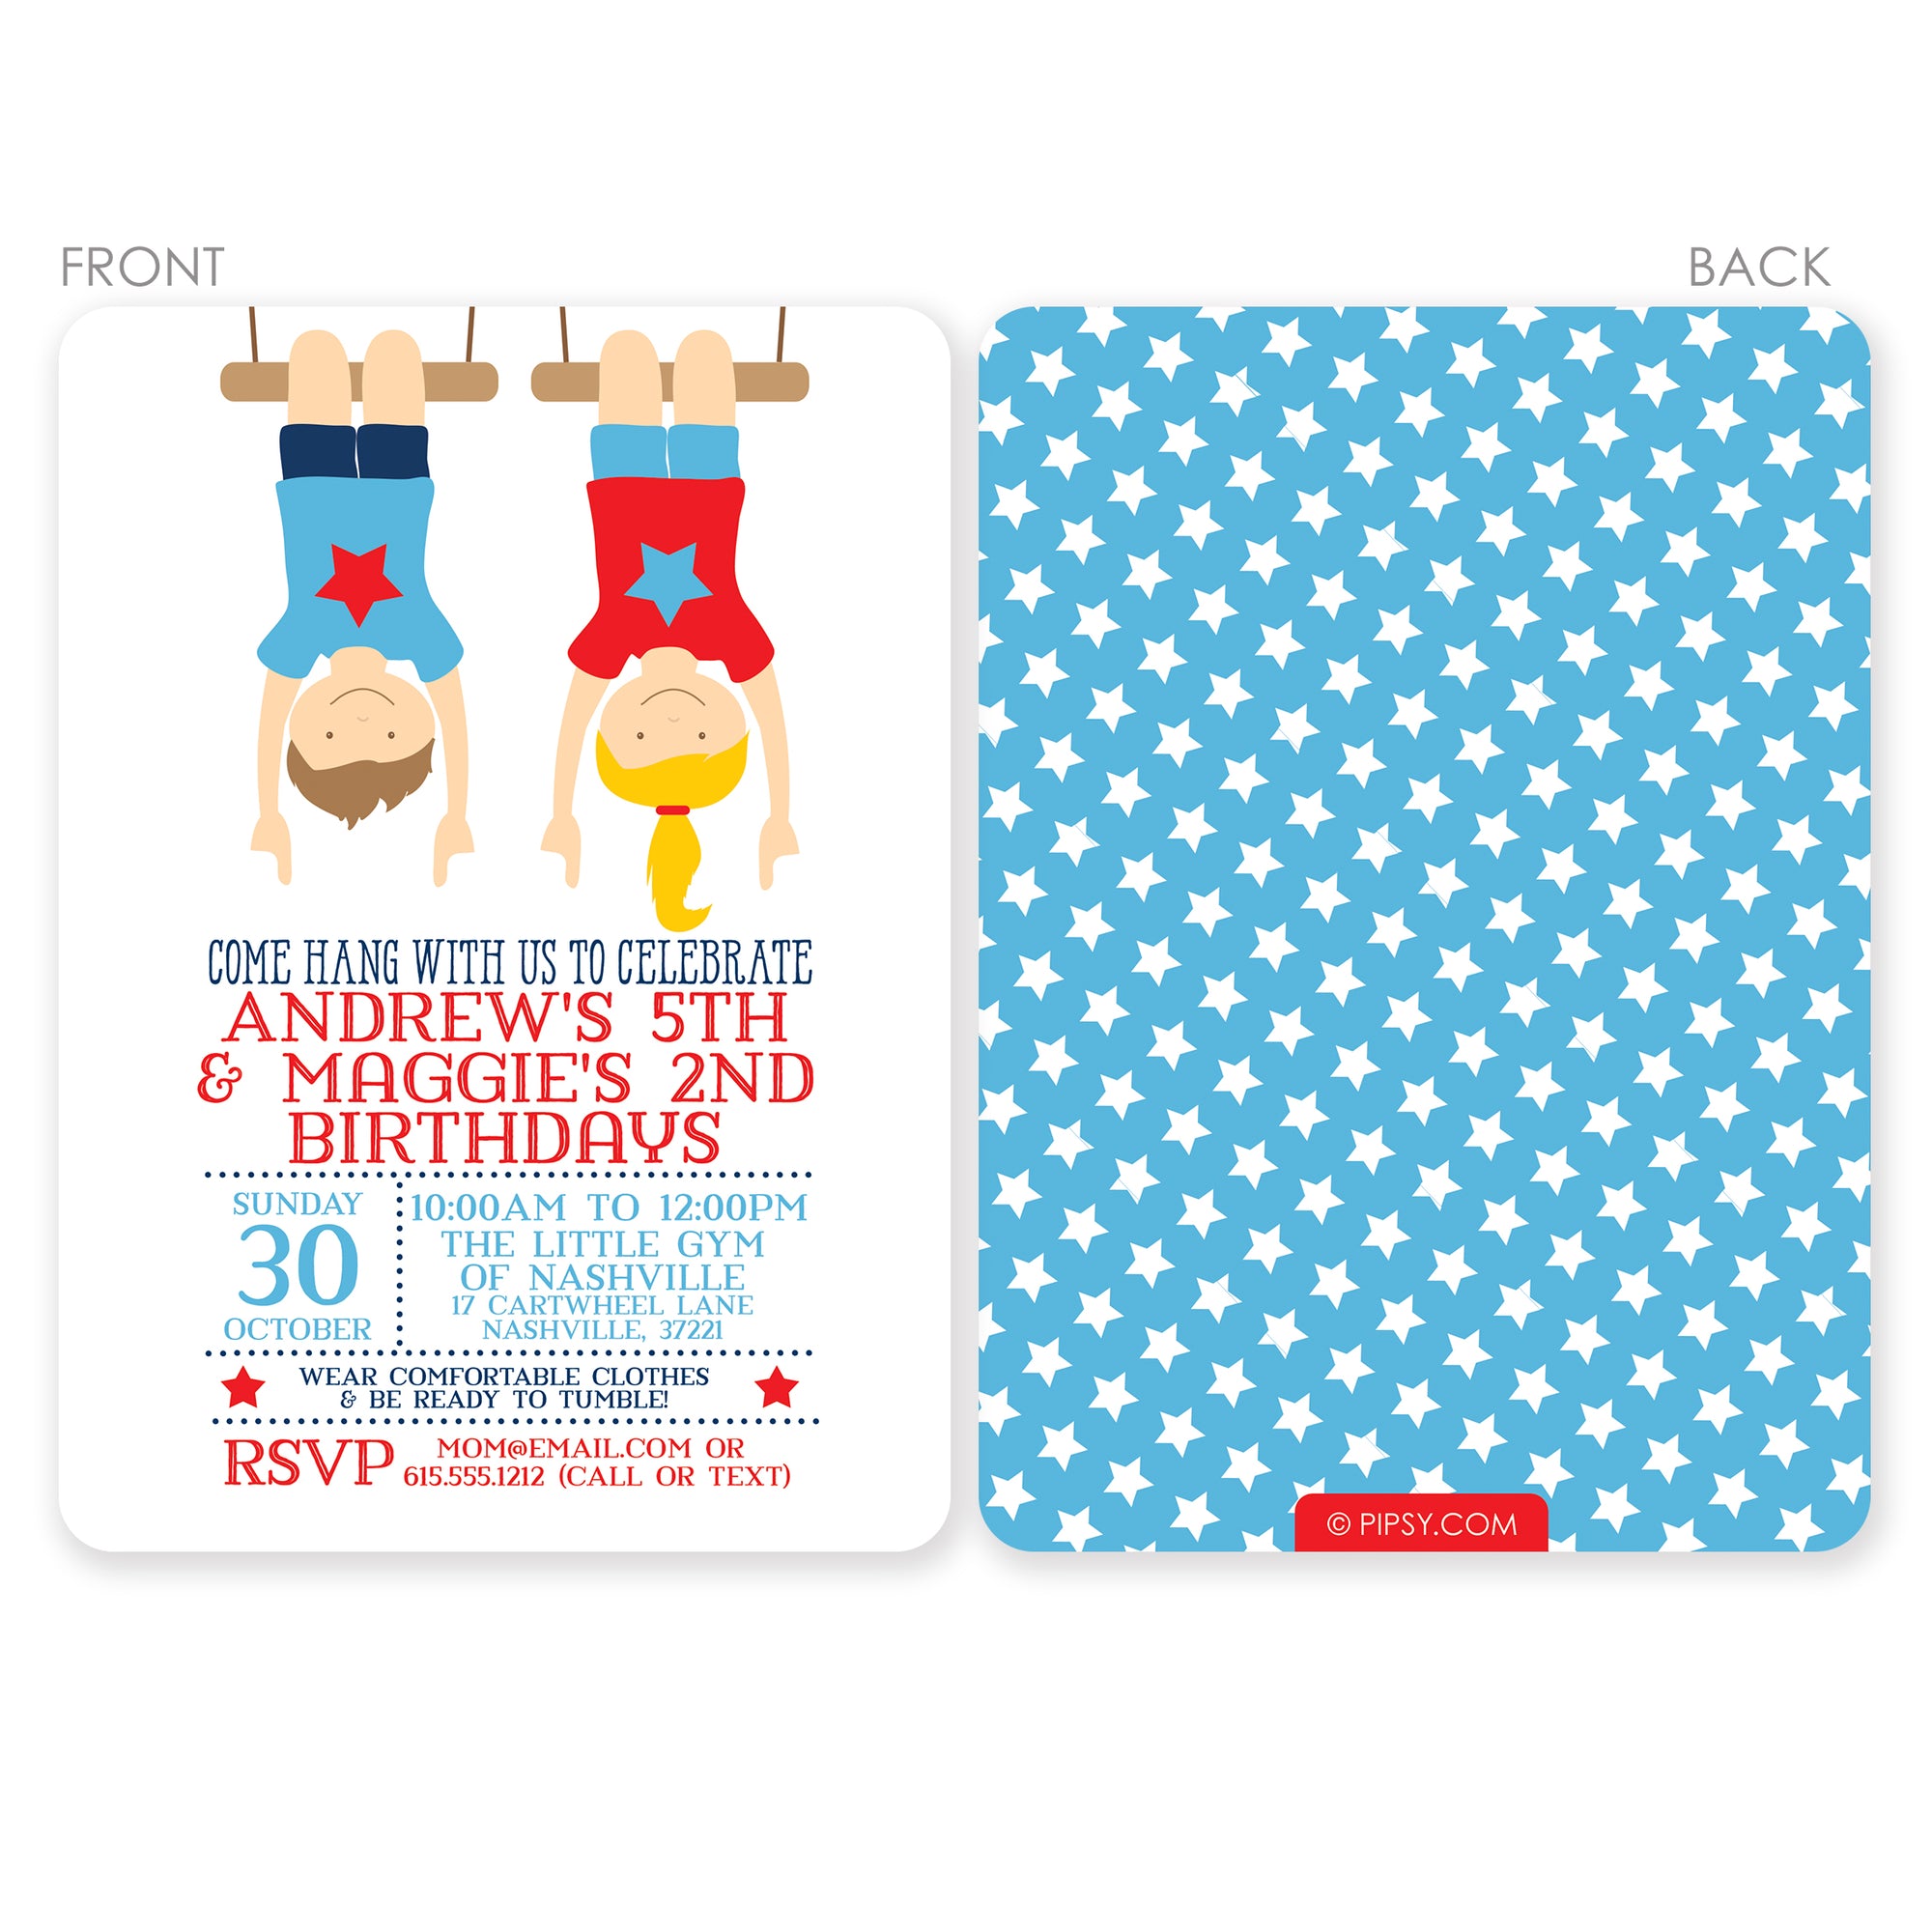 This gymnastics-themed birthday party invitation is perfect for celebrating a party for twins, siblings, or even best friends. Printed on luxurious cardstock, it can be customized with your choice of colors, for a truly unique look. We can adjust eye, hair, and skin color upon request.